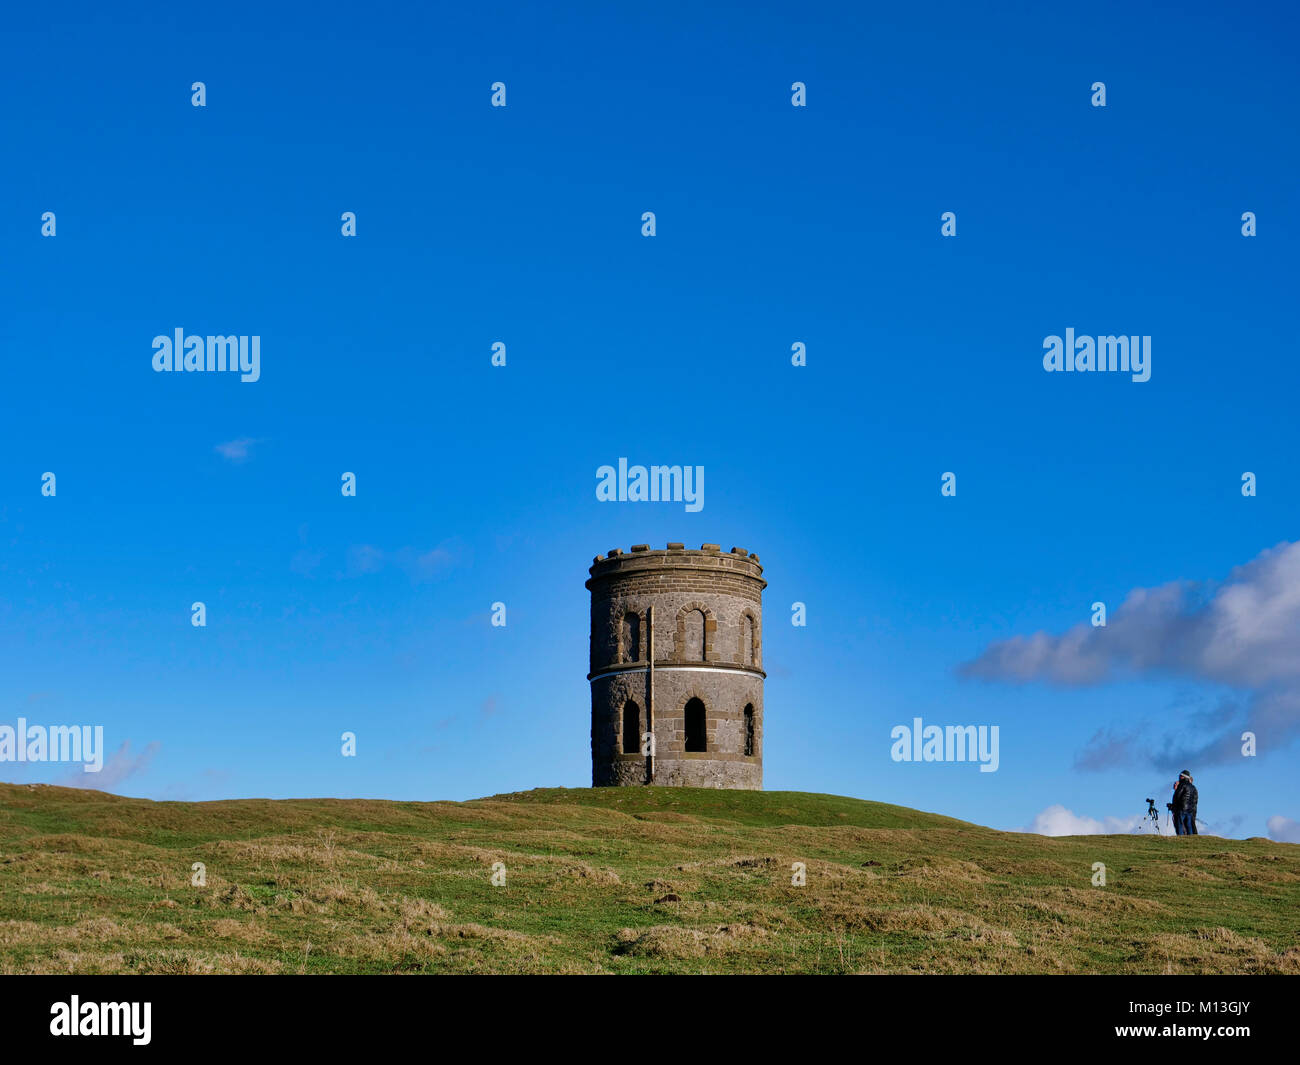 Solomon's Temple, Buxton. 26th Jan, 2018. UK Weather: photographers taking pictures of Solomon's Temple with bright blue skys, also called Grinlow Tower the Victorian Fortified hill marker above the spa town of Buxton, Derbyshire in the Derbyshire Peak District National Park Credit: Doug Blane/Alamy Live News Stock Photo